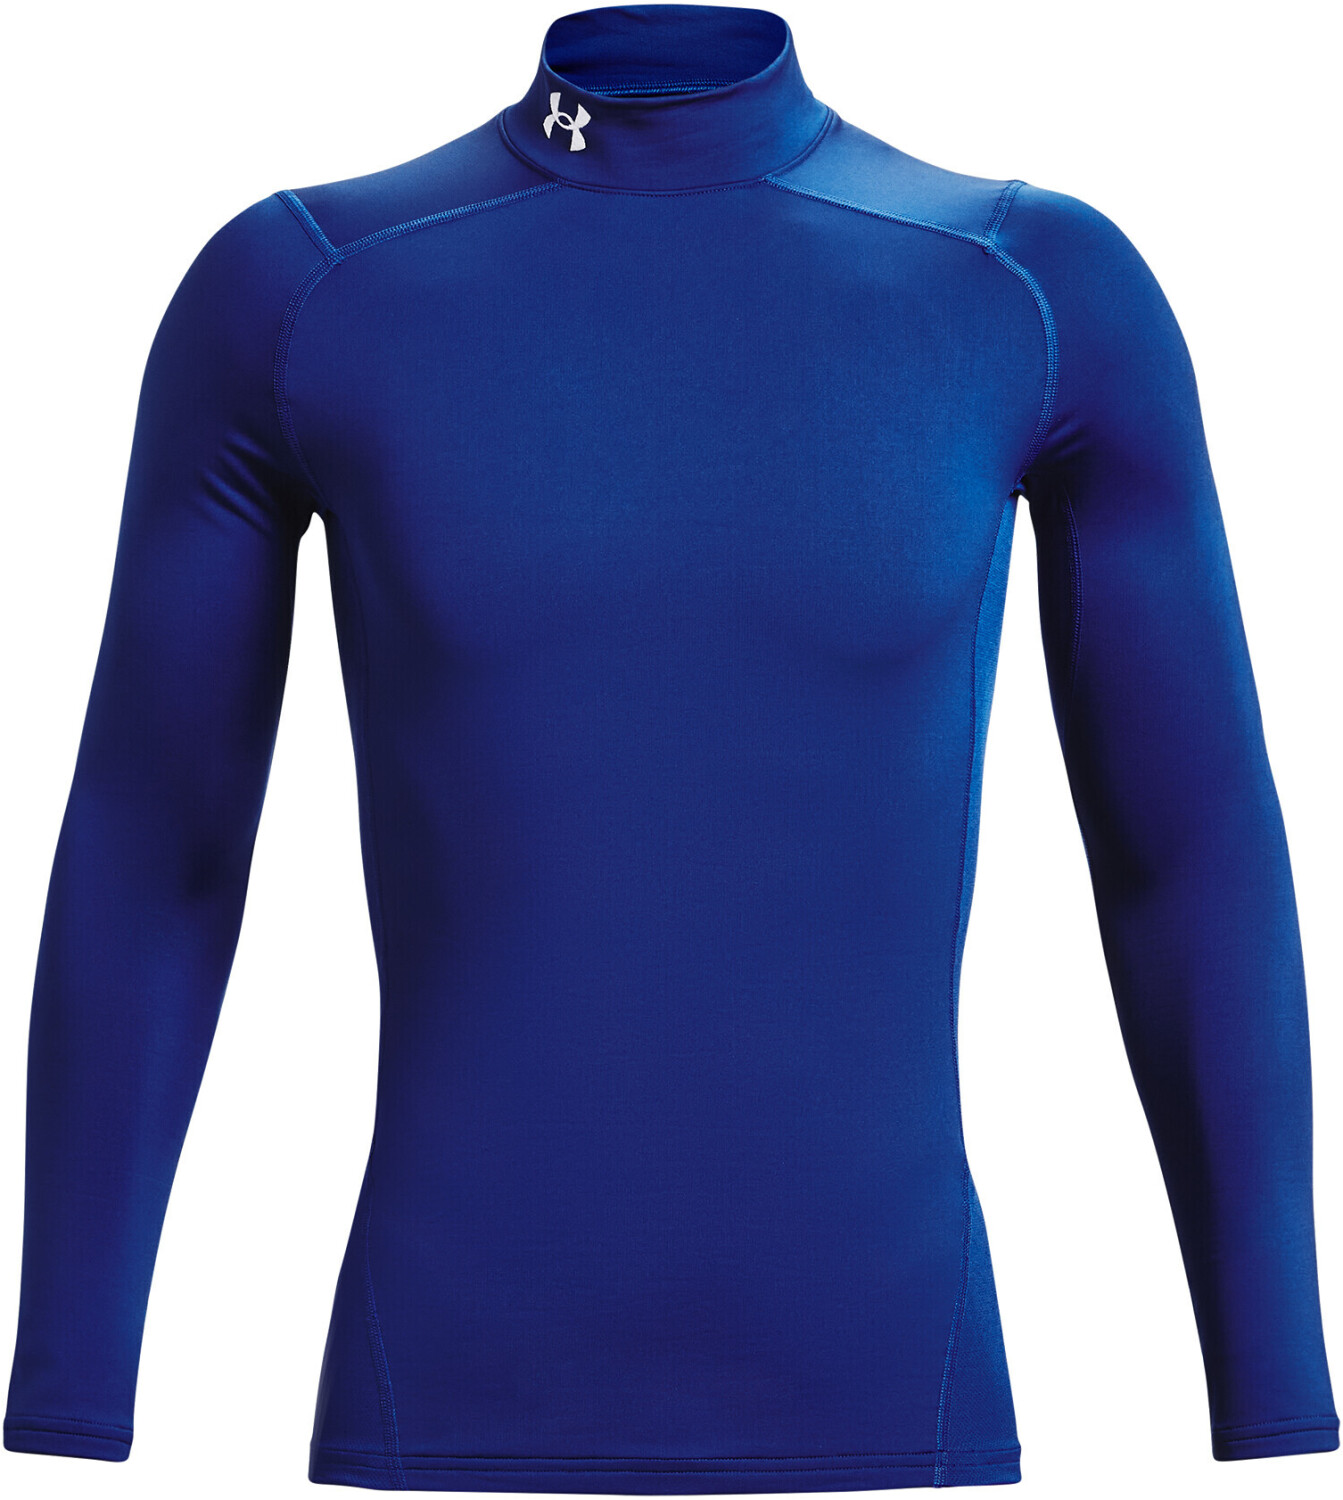 Buy Under Armour Men's ColdGear Compression Mock Neck from £30.00 (Today) –  Best Deals on